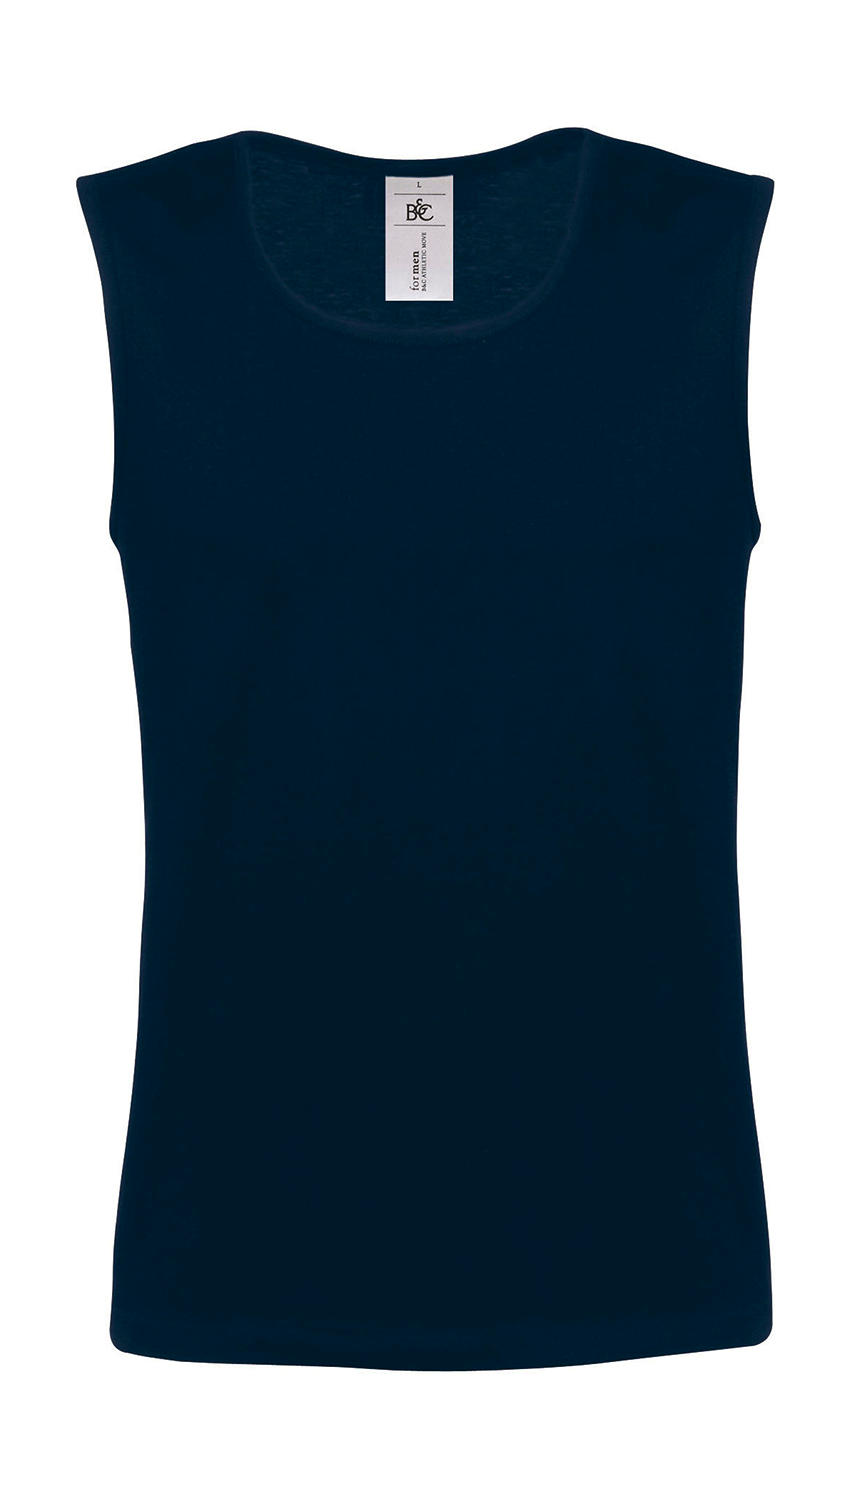  Athletic Move Shirt  in Farbe Navy